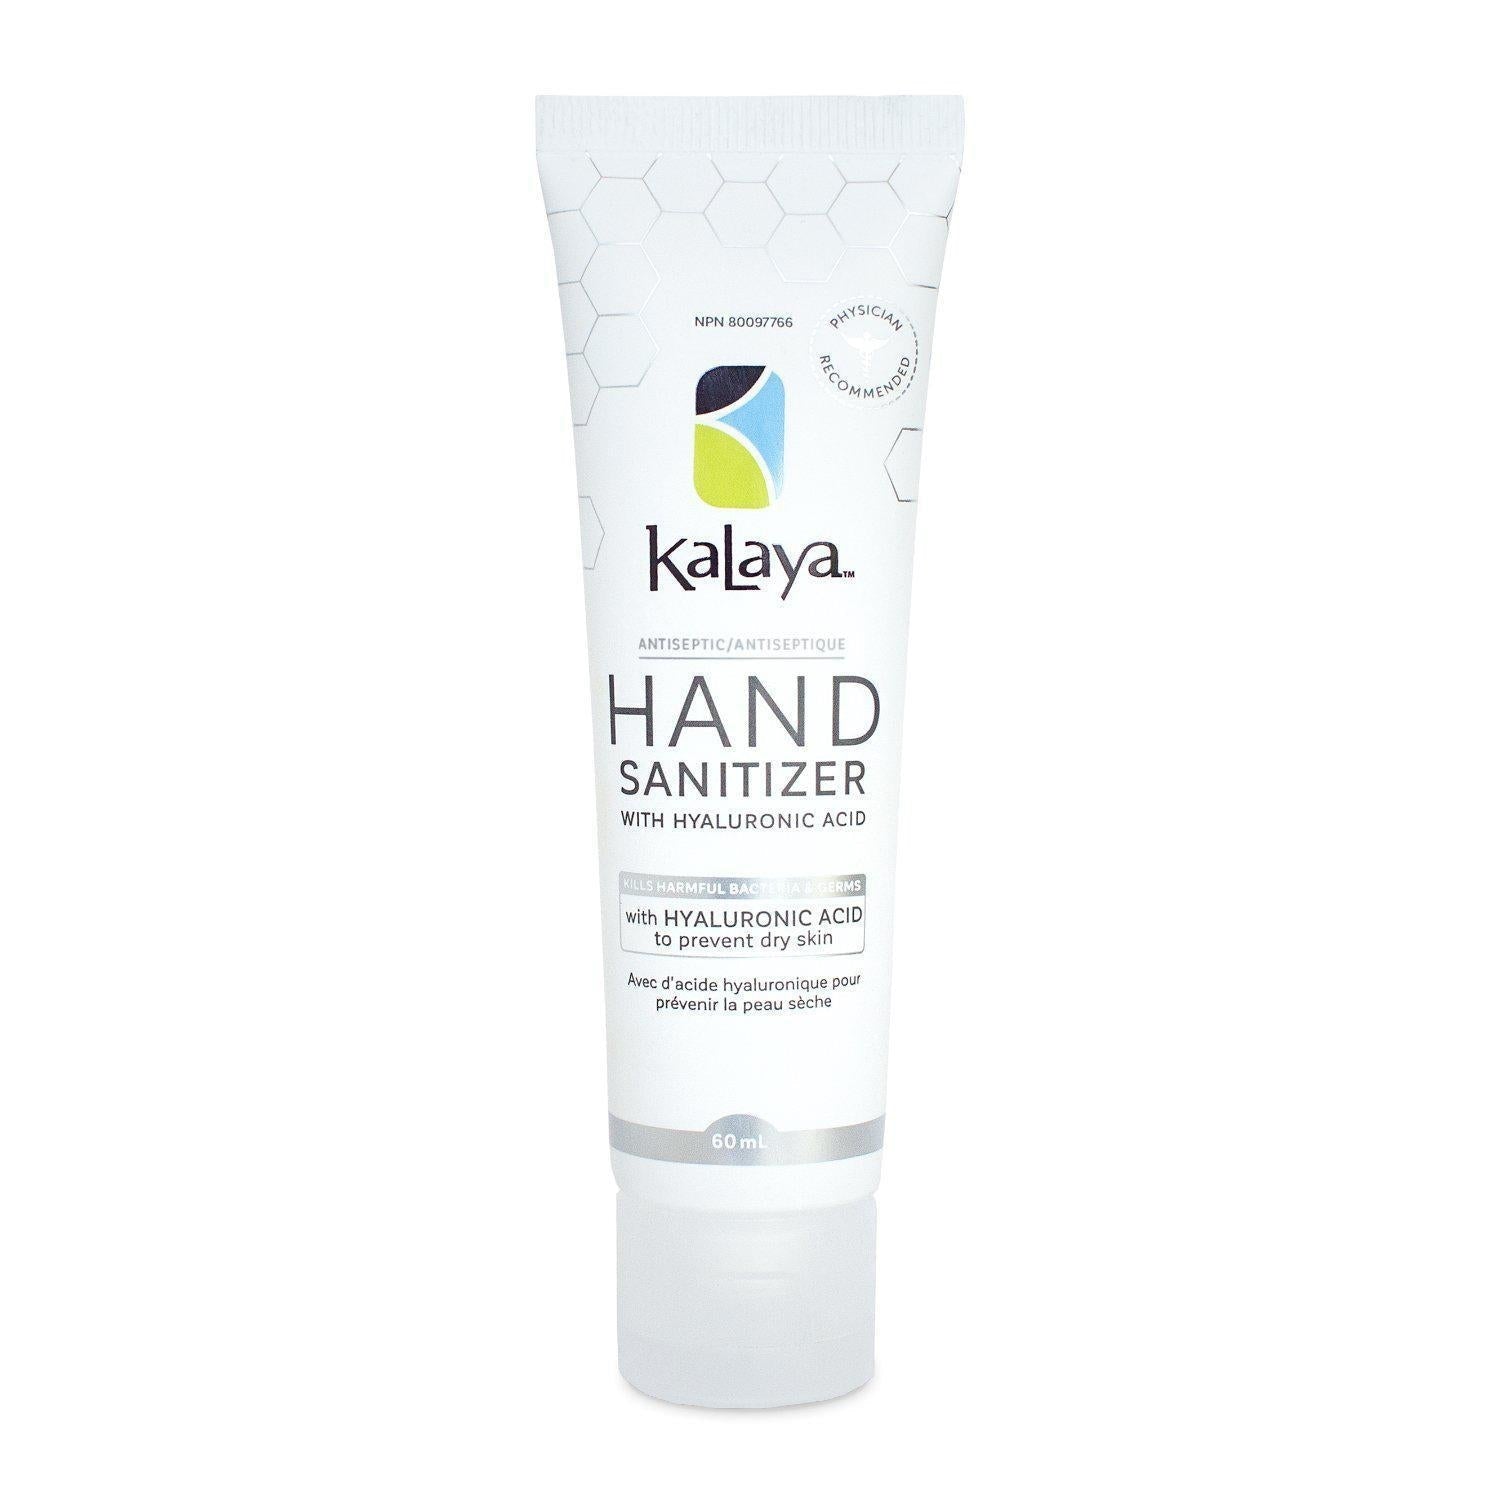 Kalaya 60mL Hand Sanitizer travel size tube with Hyaluronic Acid and 70% alcohol - Made in Canada